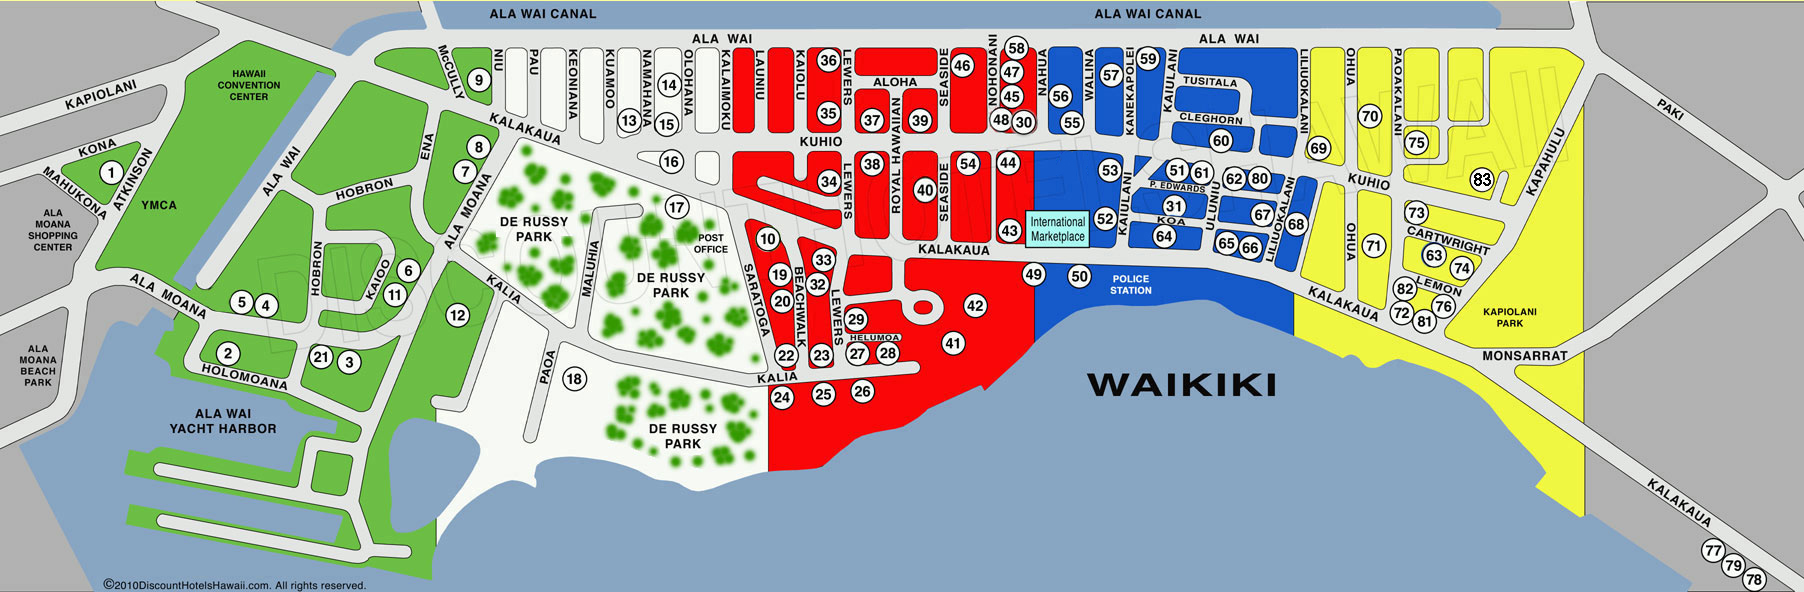 Map of Waikiki with hotel locations